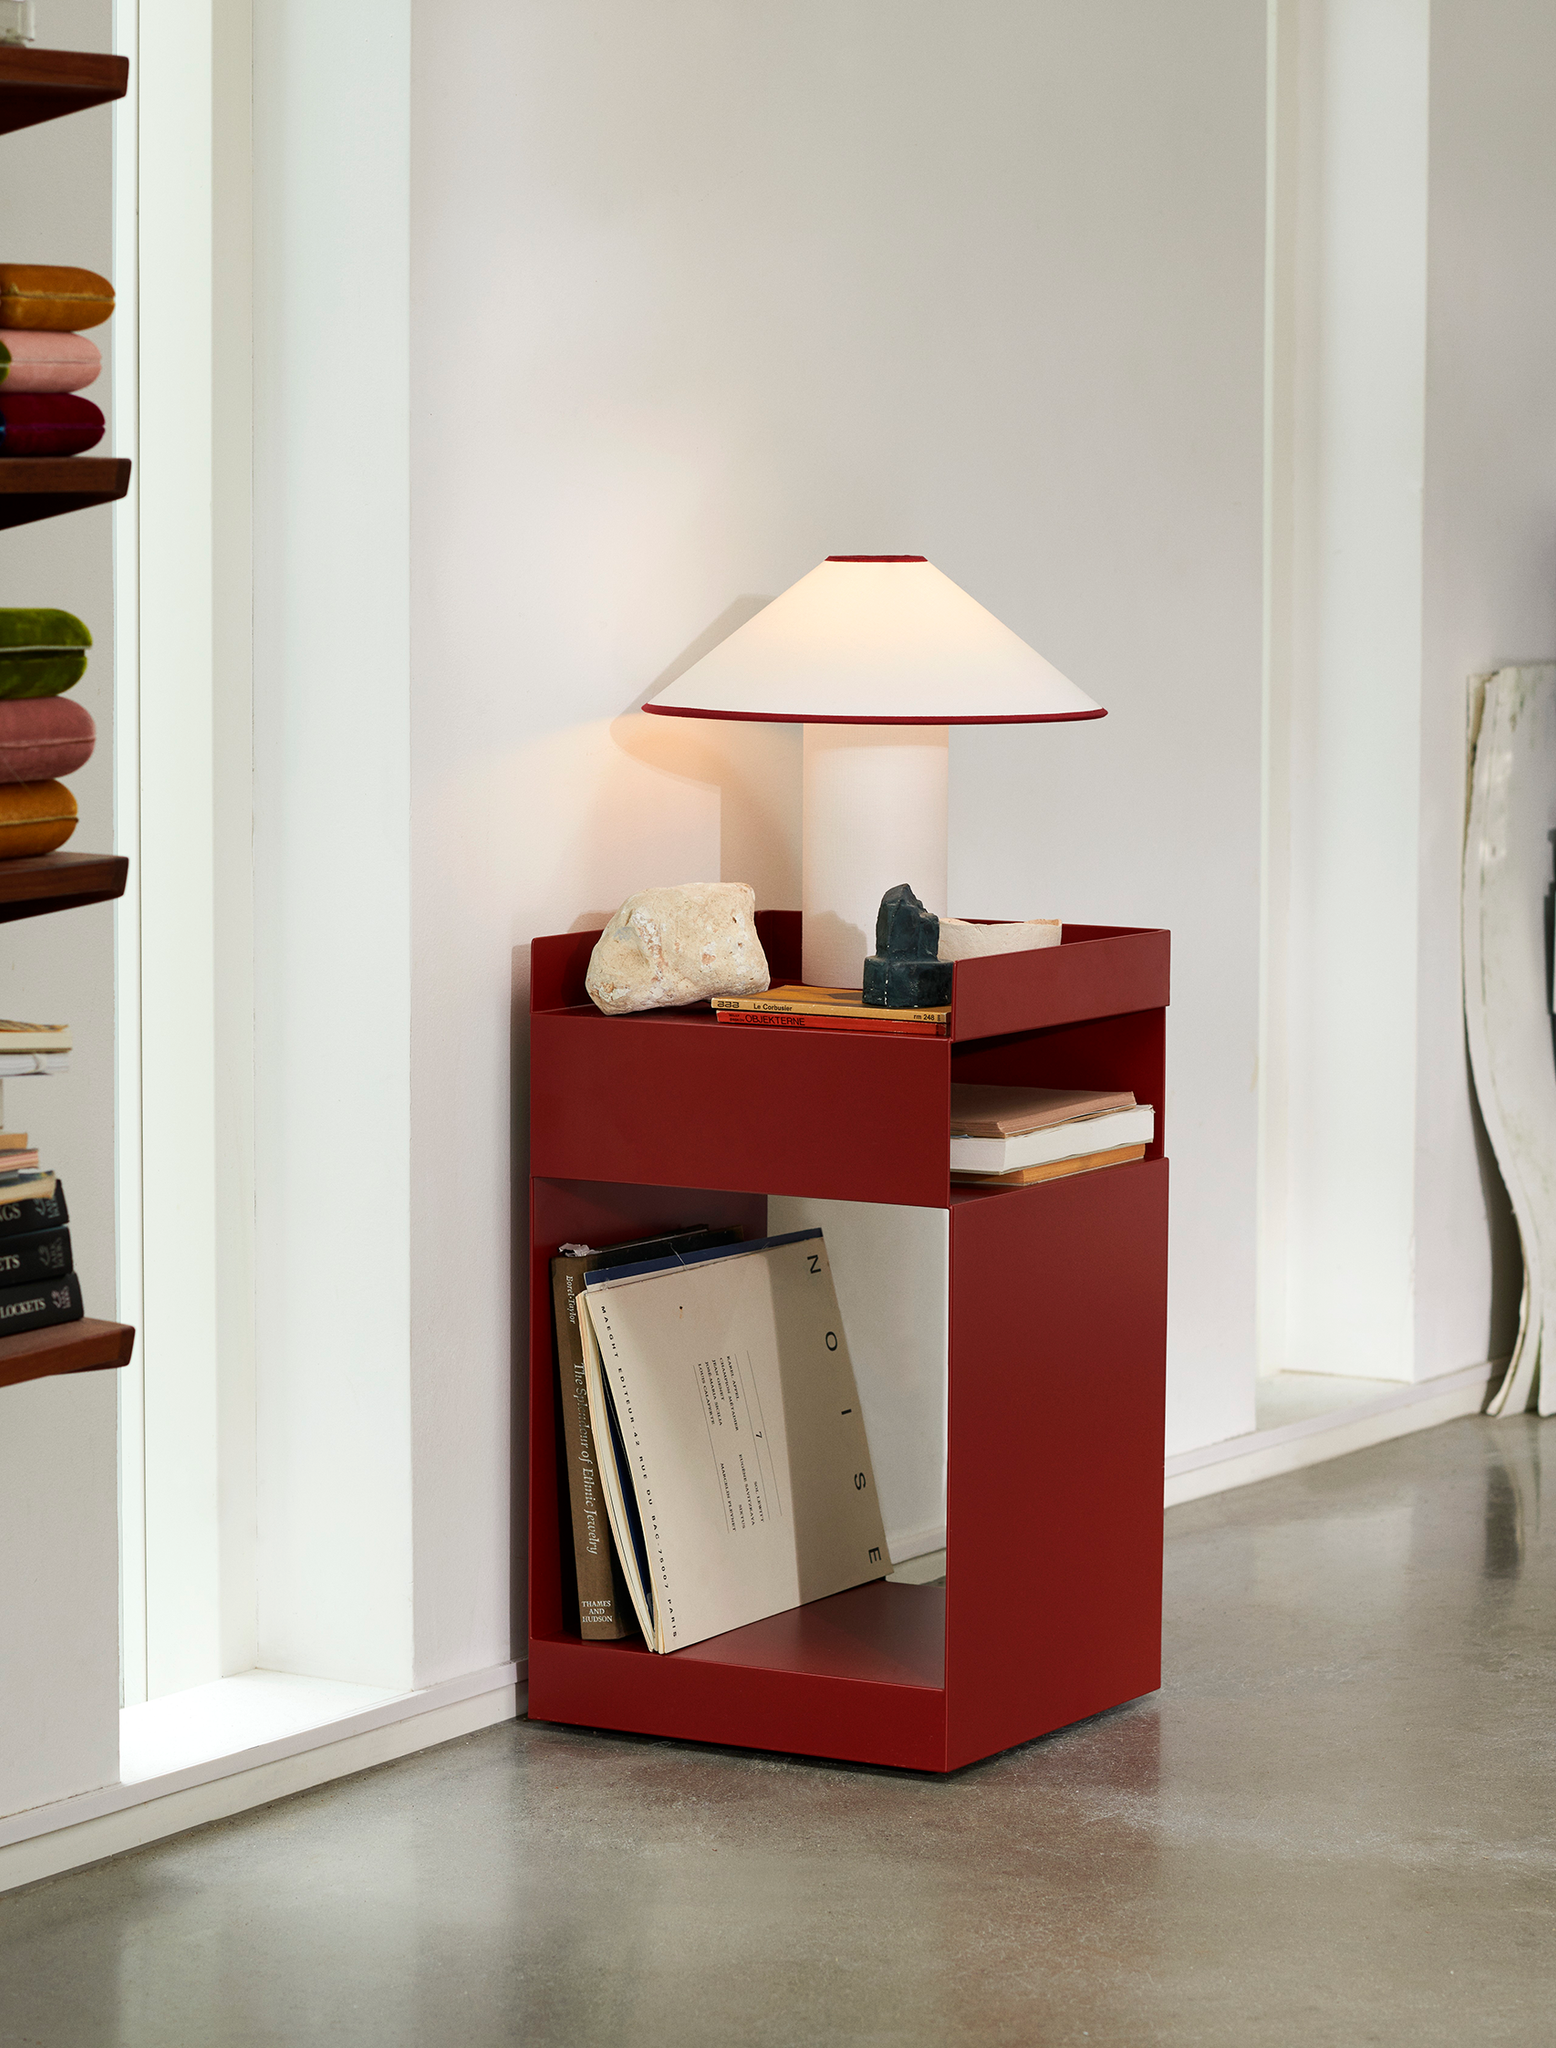 Colette ATD6 Table Lamp - More Options